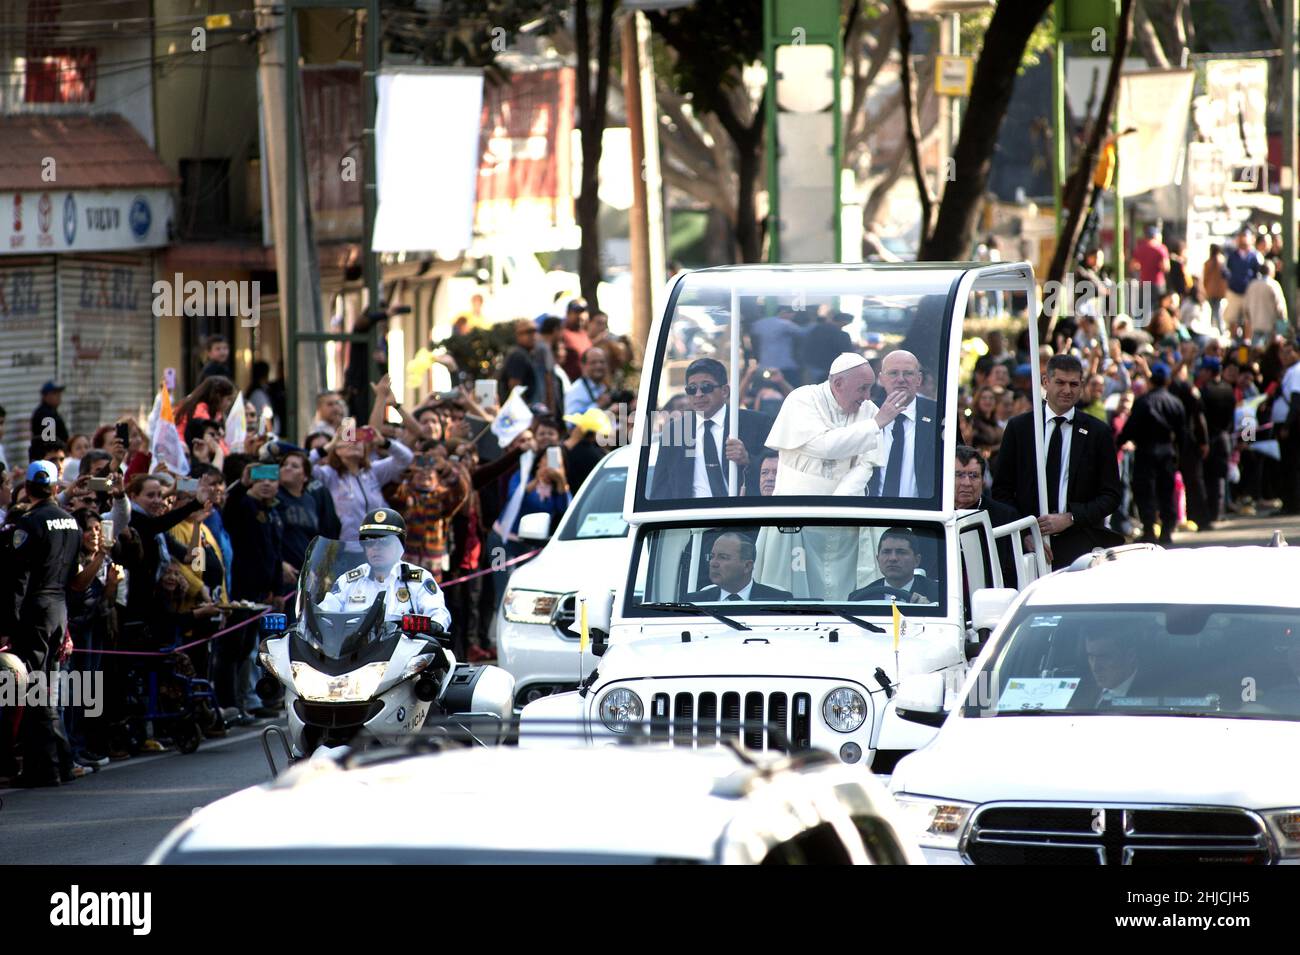 February 14, 2016; Mexico City, Mexico. Pope Francis riding in a Chrysler Jeep Wrangler popemobile speeds past crowds of waving Mexicans along a major avenue in Mexico City during his second full day of activities in the Mexican capital. Pope Francis spent 5 days in Mexico visiting cities all across Mexico recently torn by a brutal drug war, corruption, and economic problems. Stock Photo